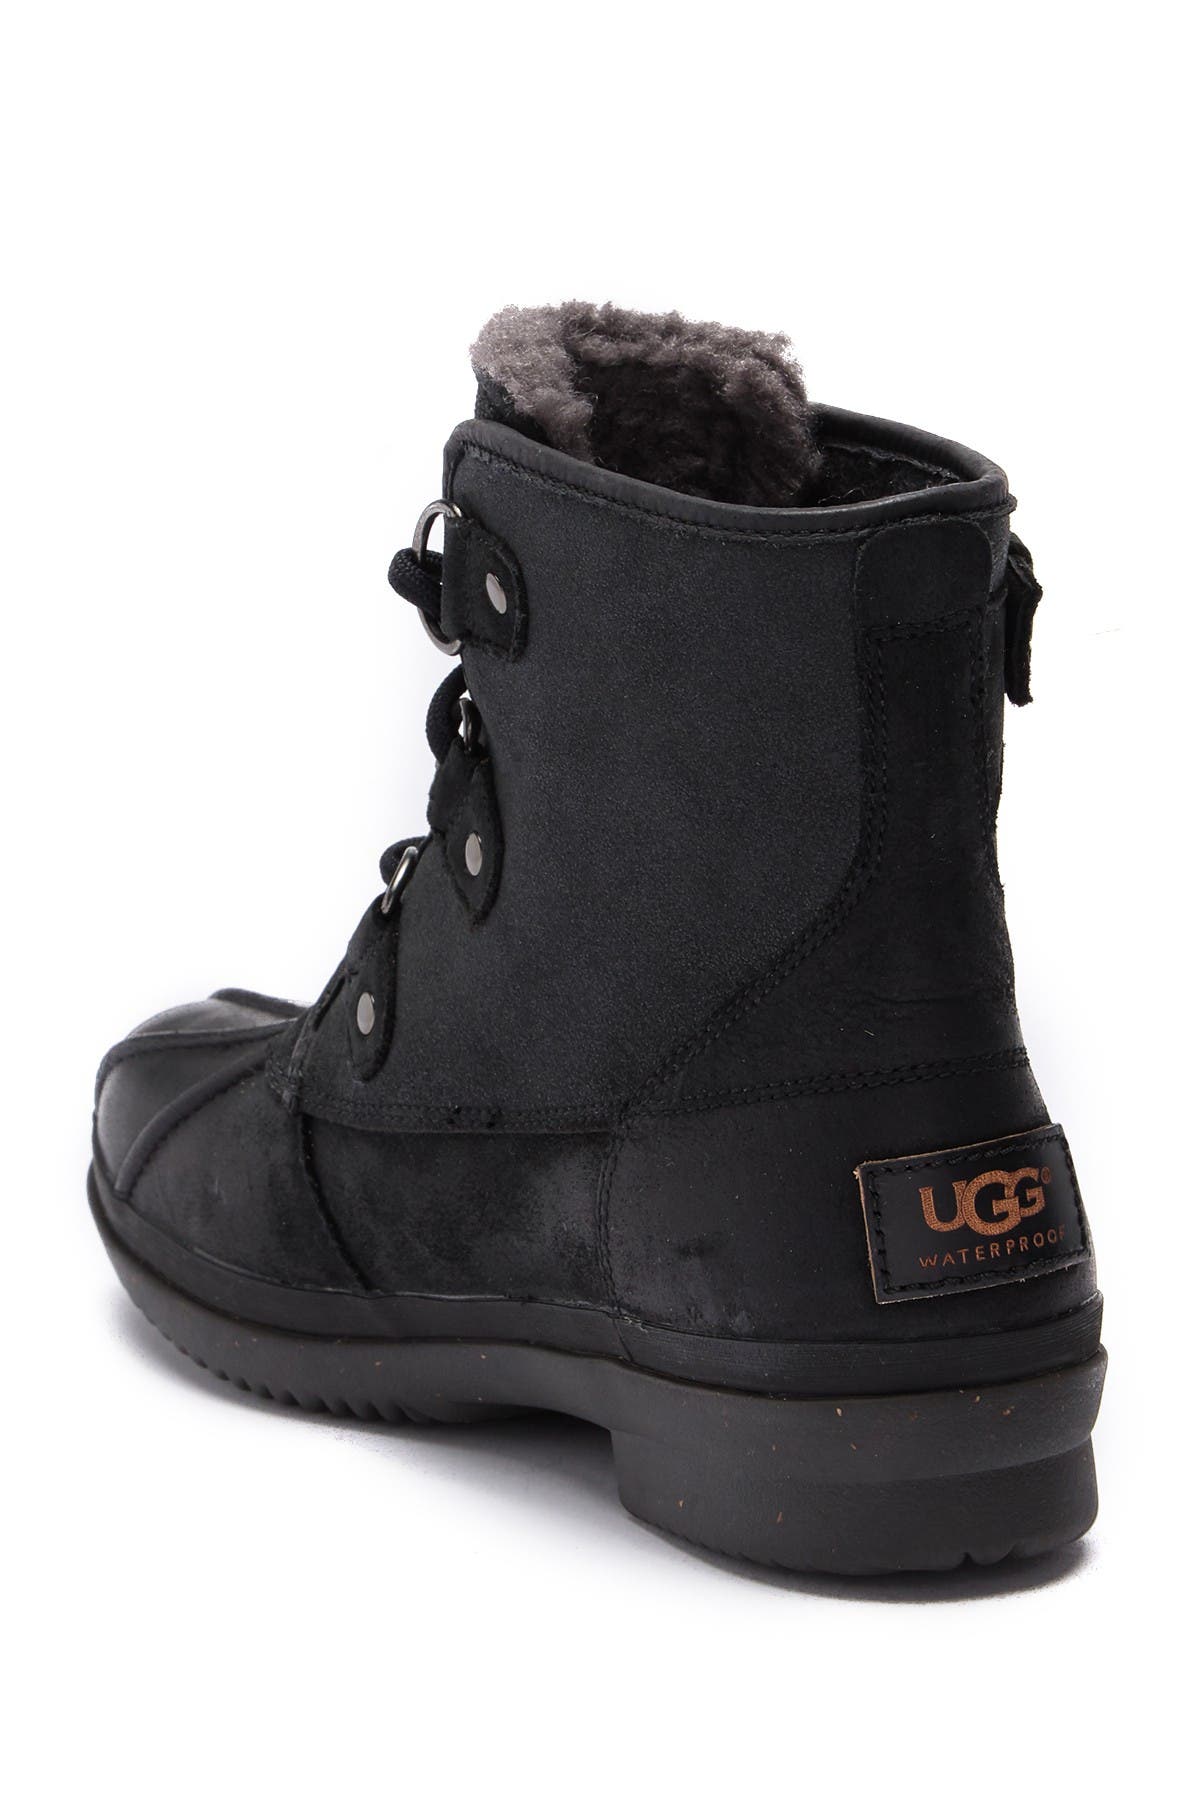 ugg cecile duck boot